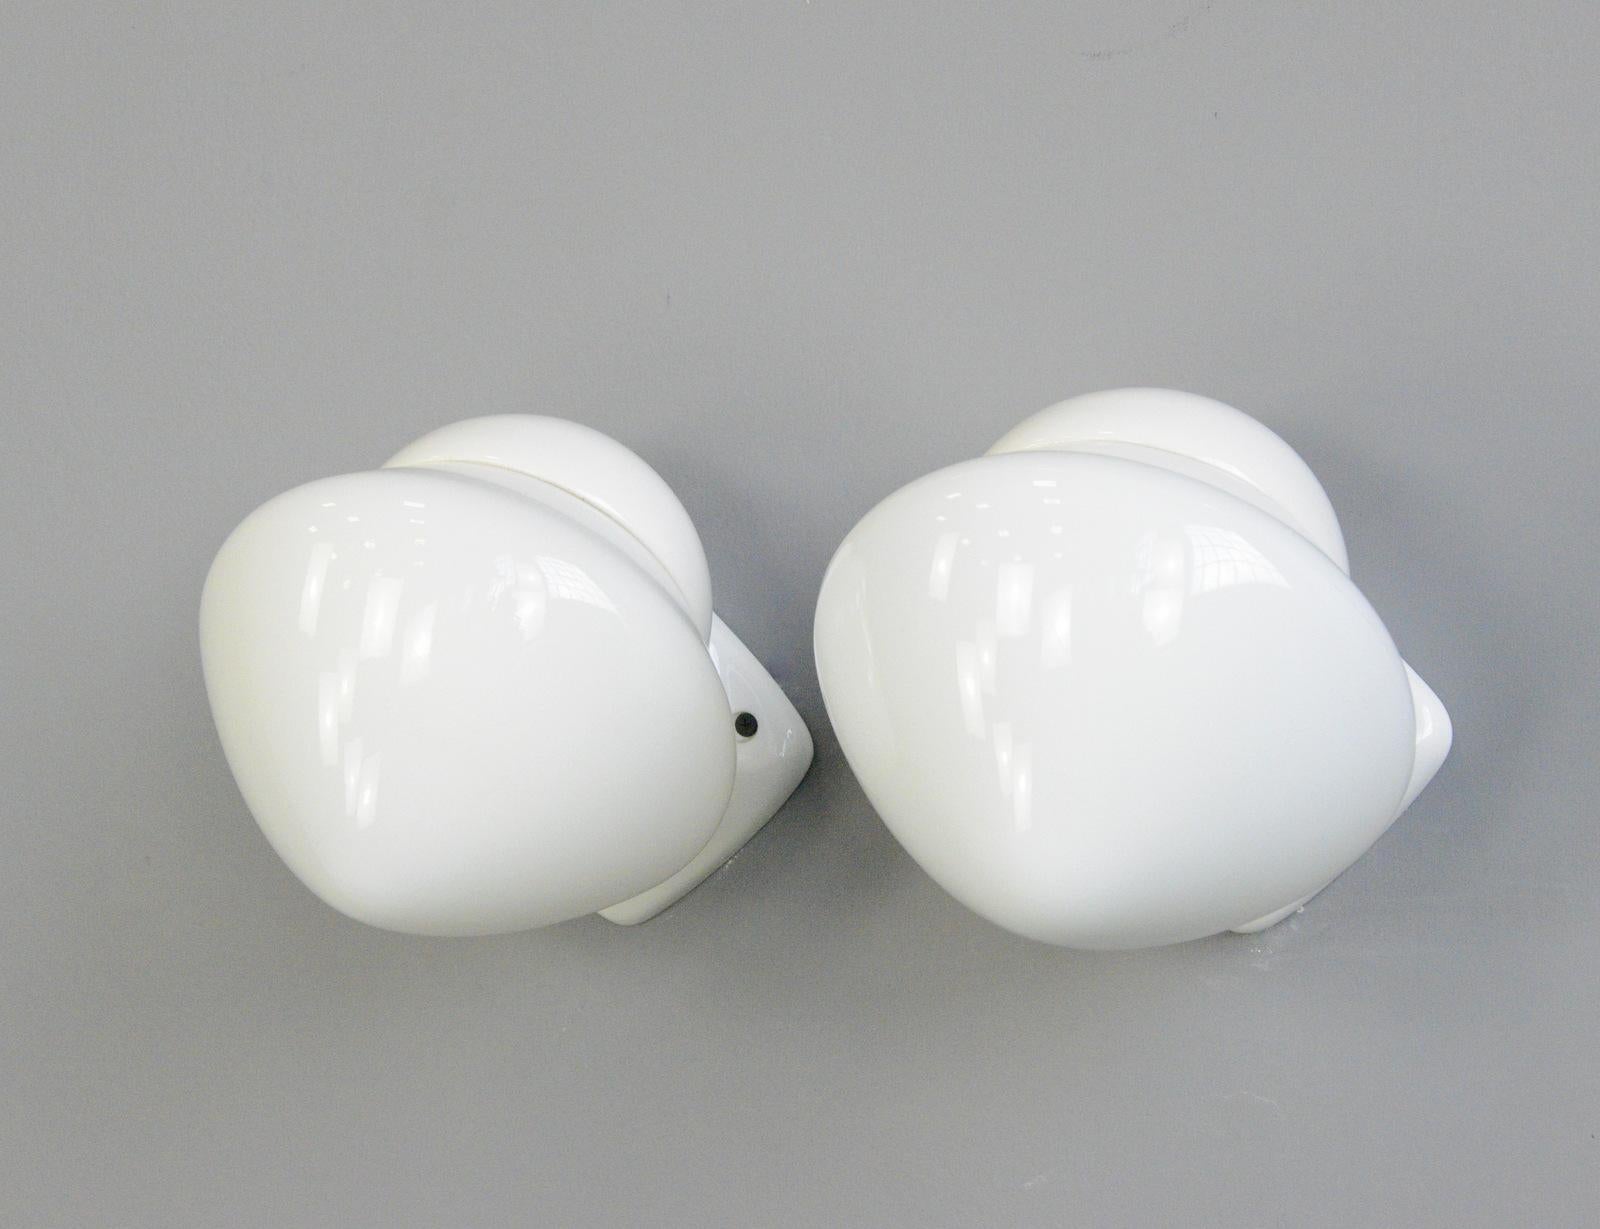 Porcelain bathroom lights by Sigvard Bernadotte for Ifo, Circa 1950s

- Price is per light (12 available)
- All prices inc VAT
- Vitreous white porcelain wall mounts
- Screw off opaline shades
- Takes E27 fitting bulbs
- Wires directly into